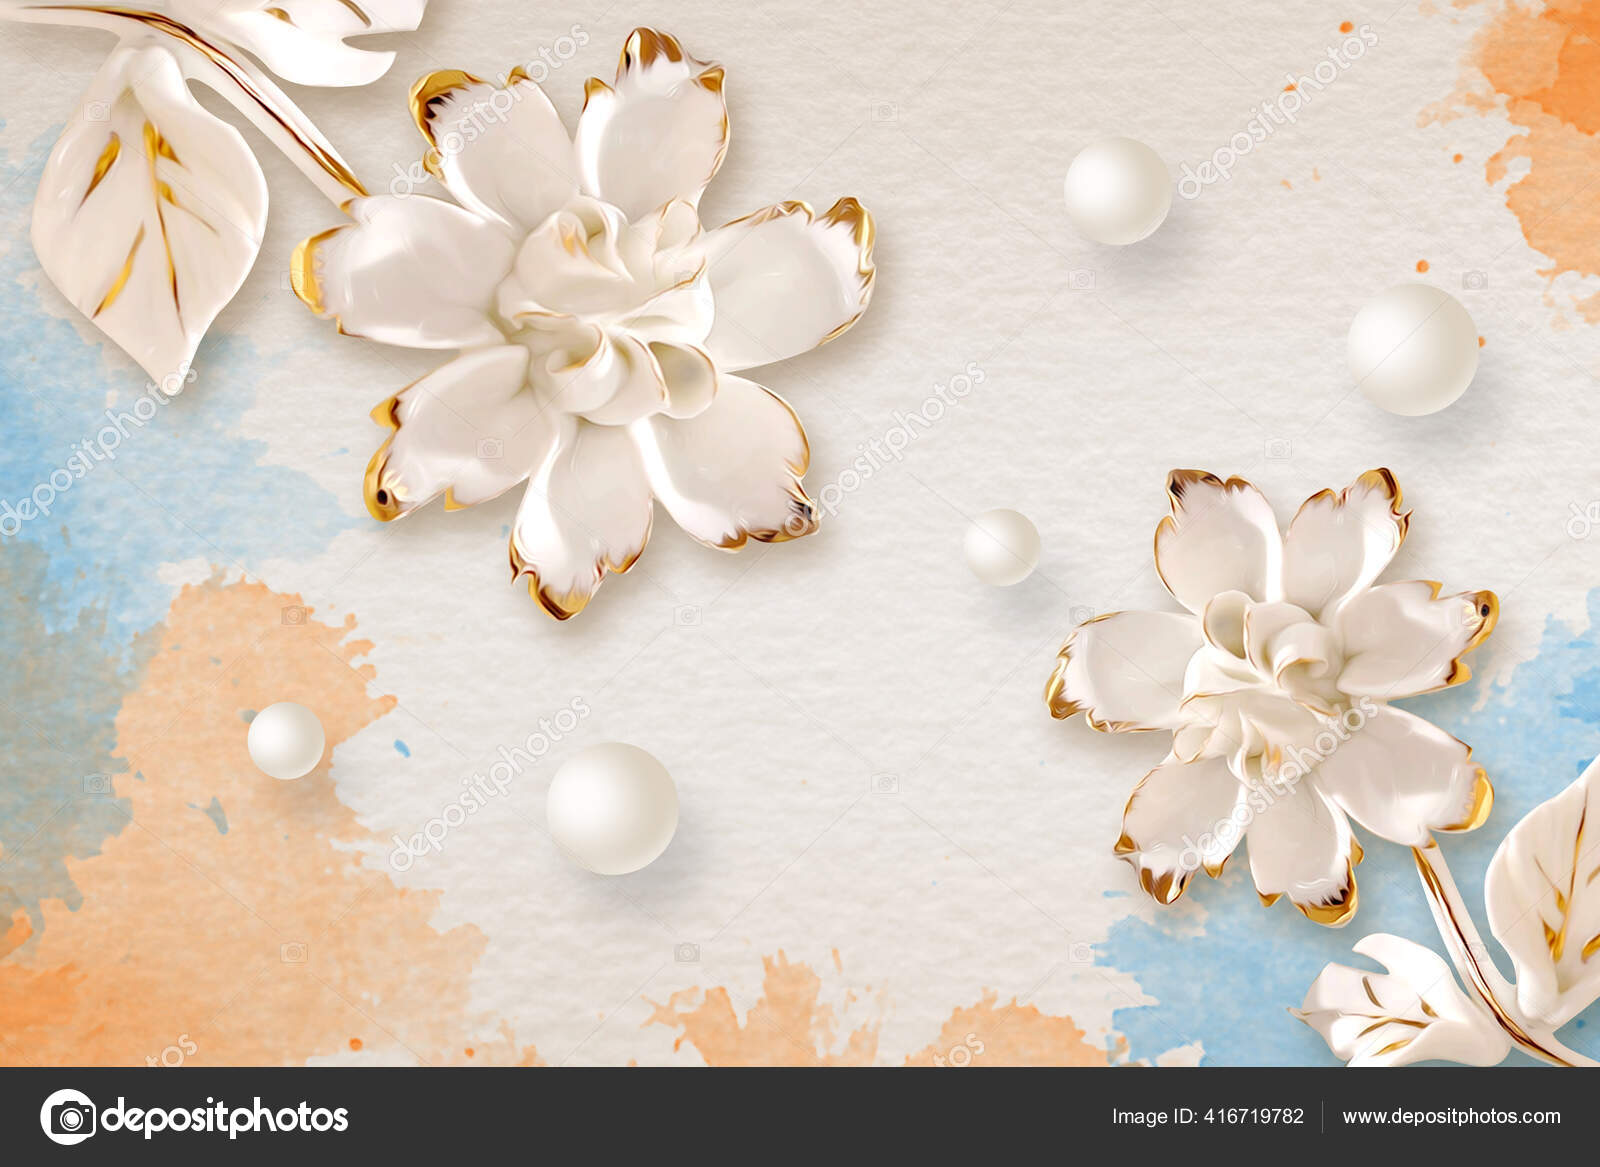 Wallpaper Design White Flower Colorful Background Stock Photo by  ©jaydeep074 416719782